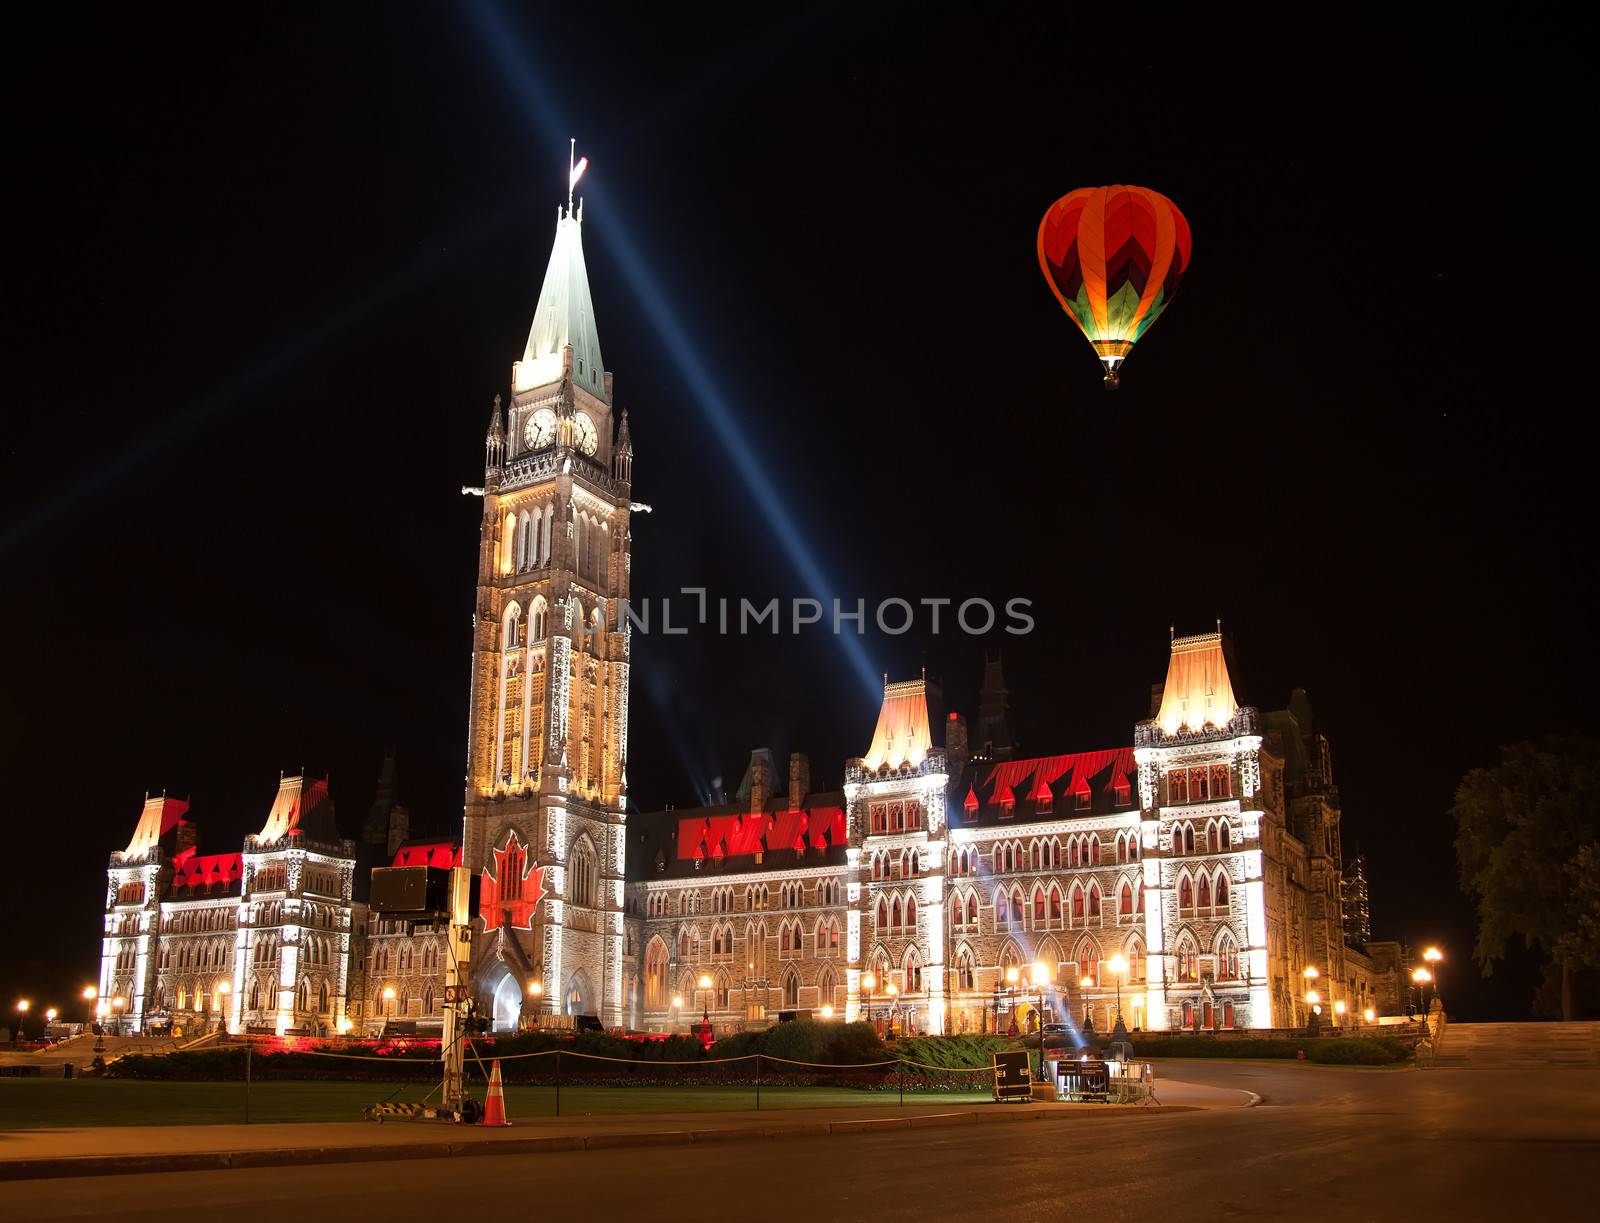 OTTAWA, CANADA ��� AUGUEST 22:  The beautiful light show projected on the parliament building to celebrate the Canada���s history and people in the summer night of August 22, 2011 in Ottawa, Canada.